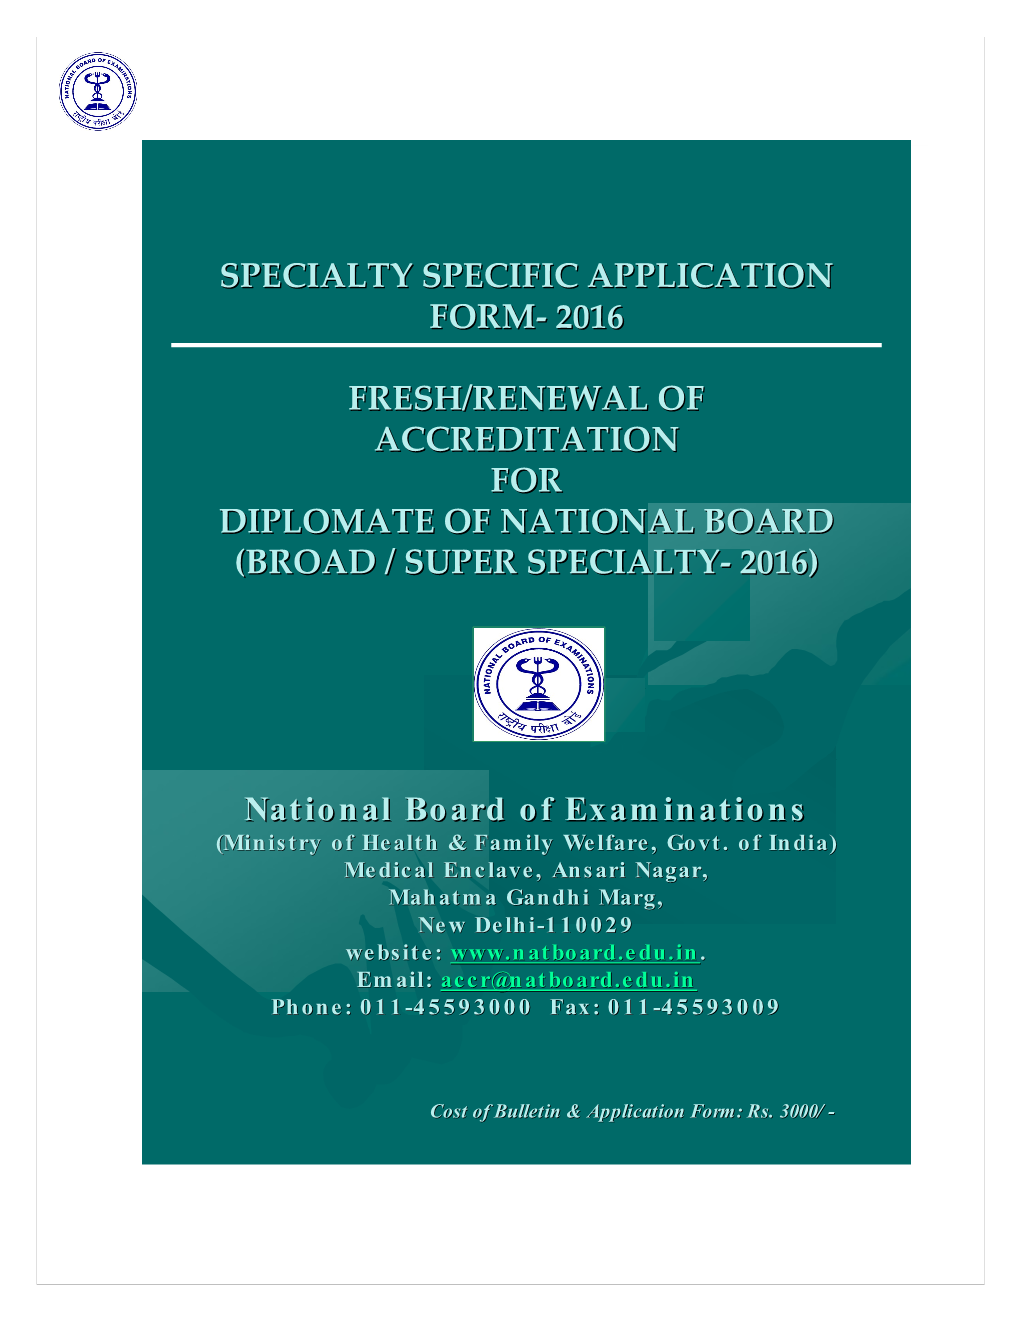 Specialty Specific Application Form 2016